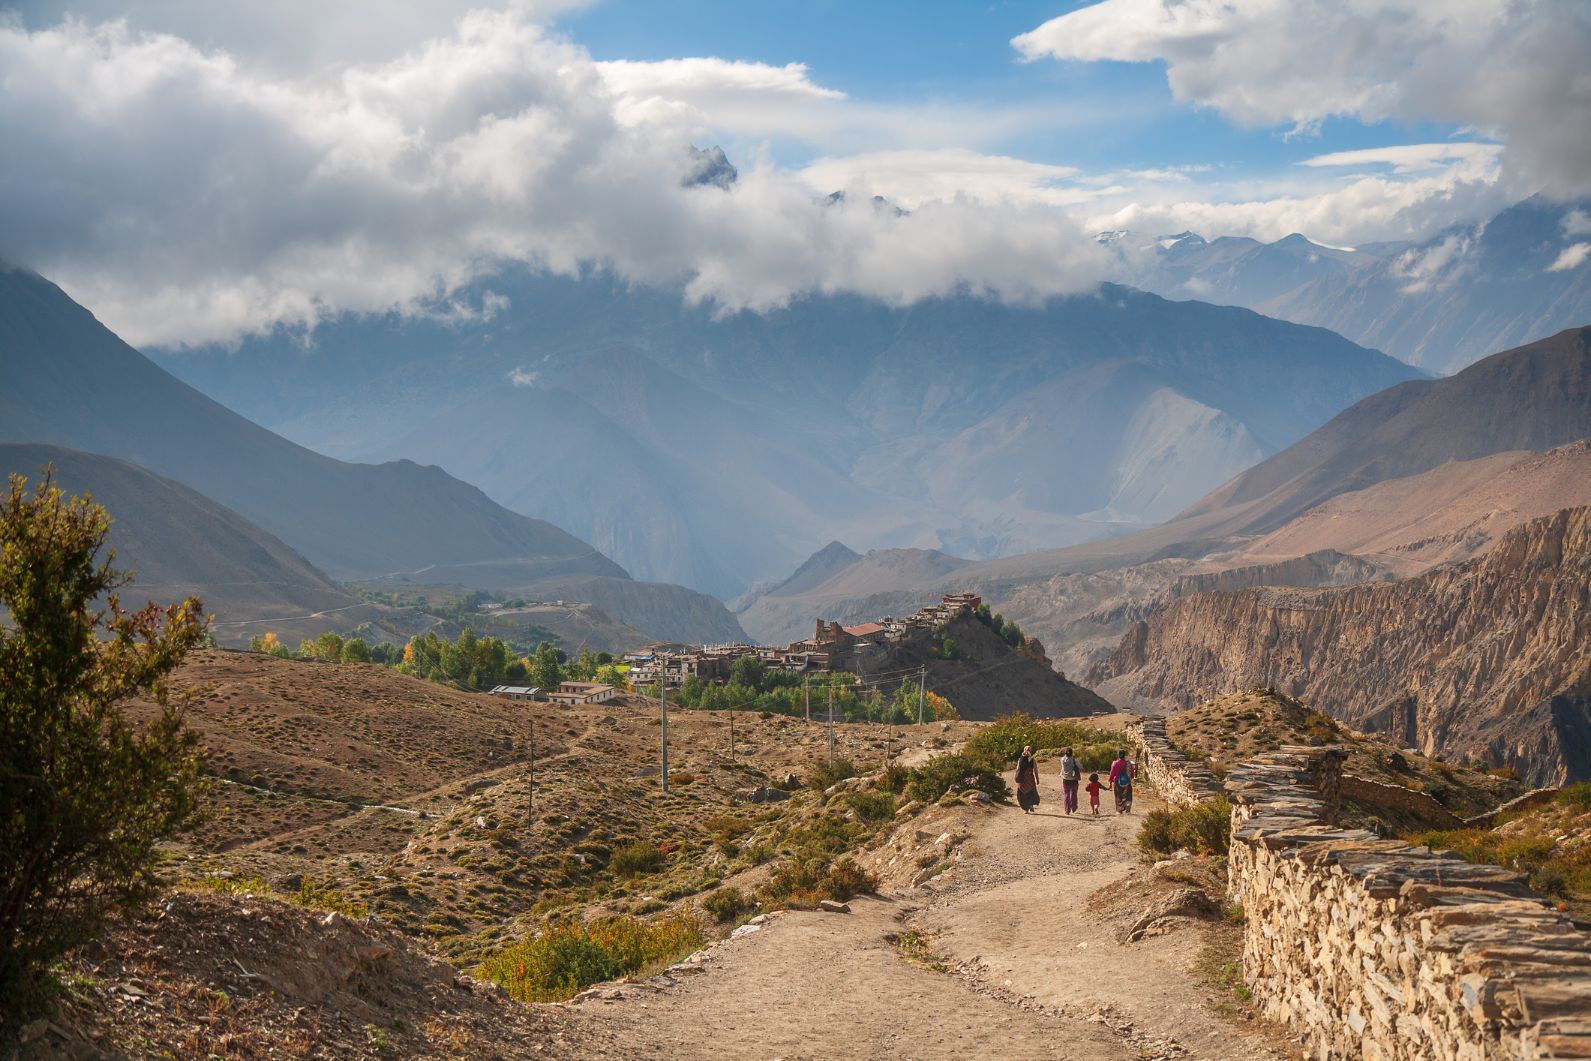 A view of the village of Jharkot surrounded by beautiful mountains, in the Lower Mustang area of Nepal.